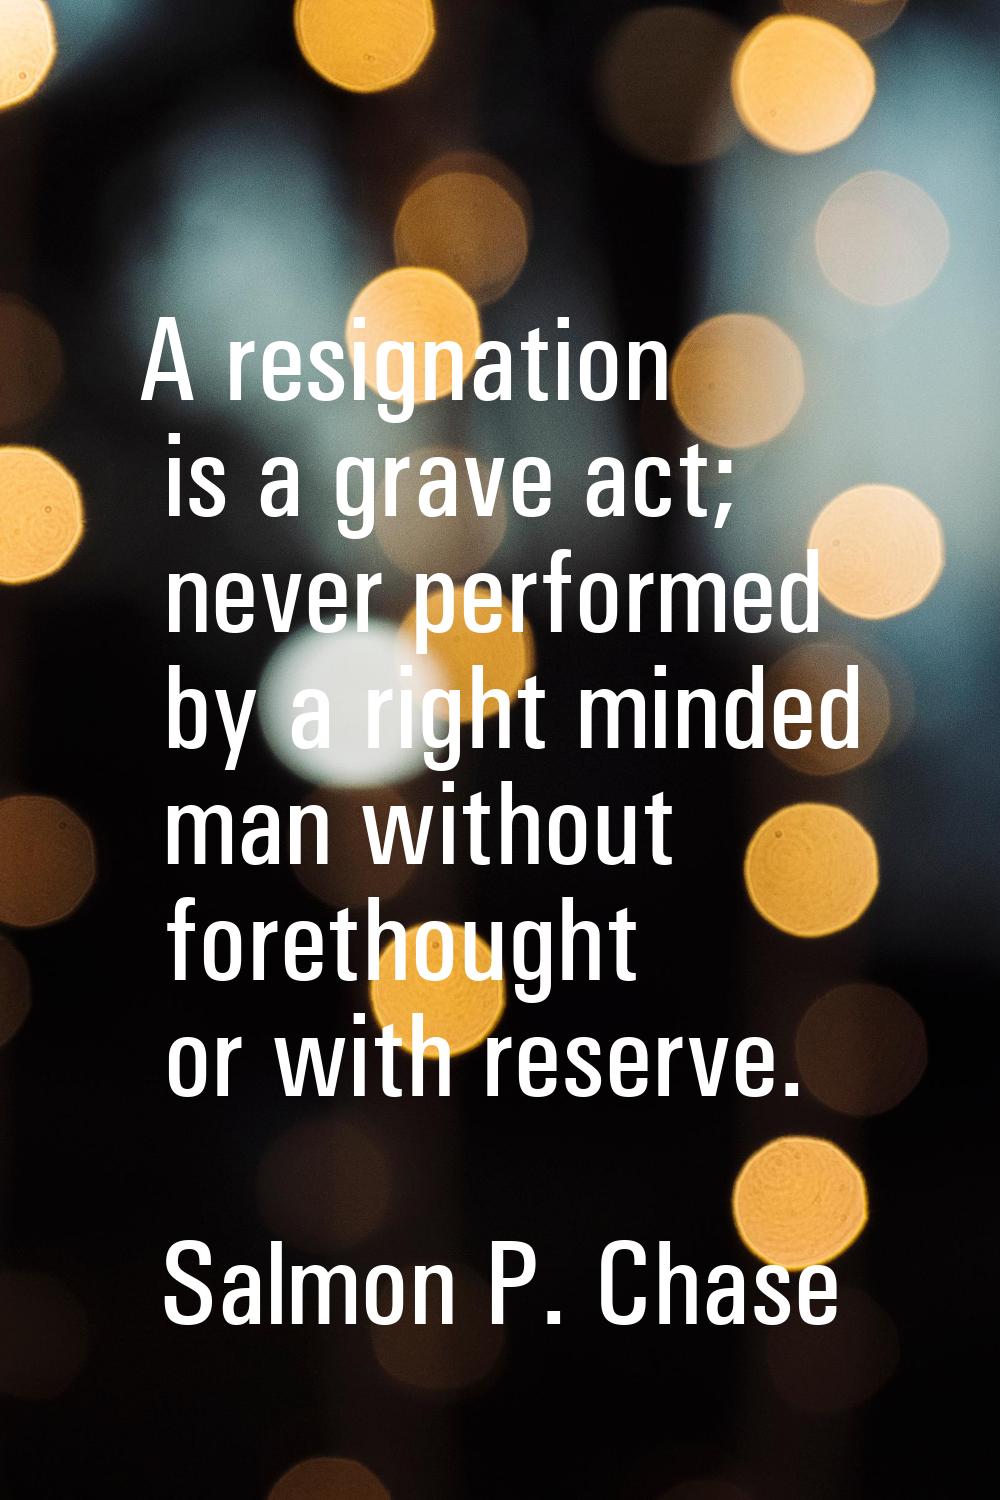 A resignation is a grave act; never performed by a right minded man without forethought or with res